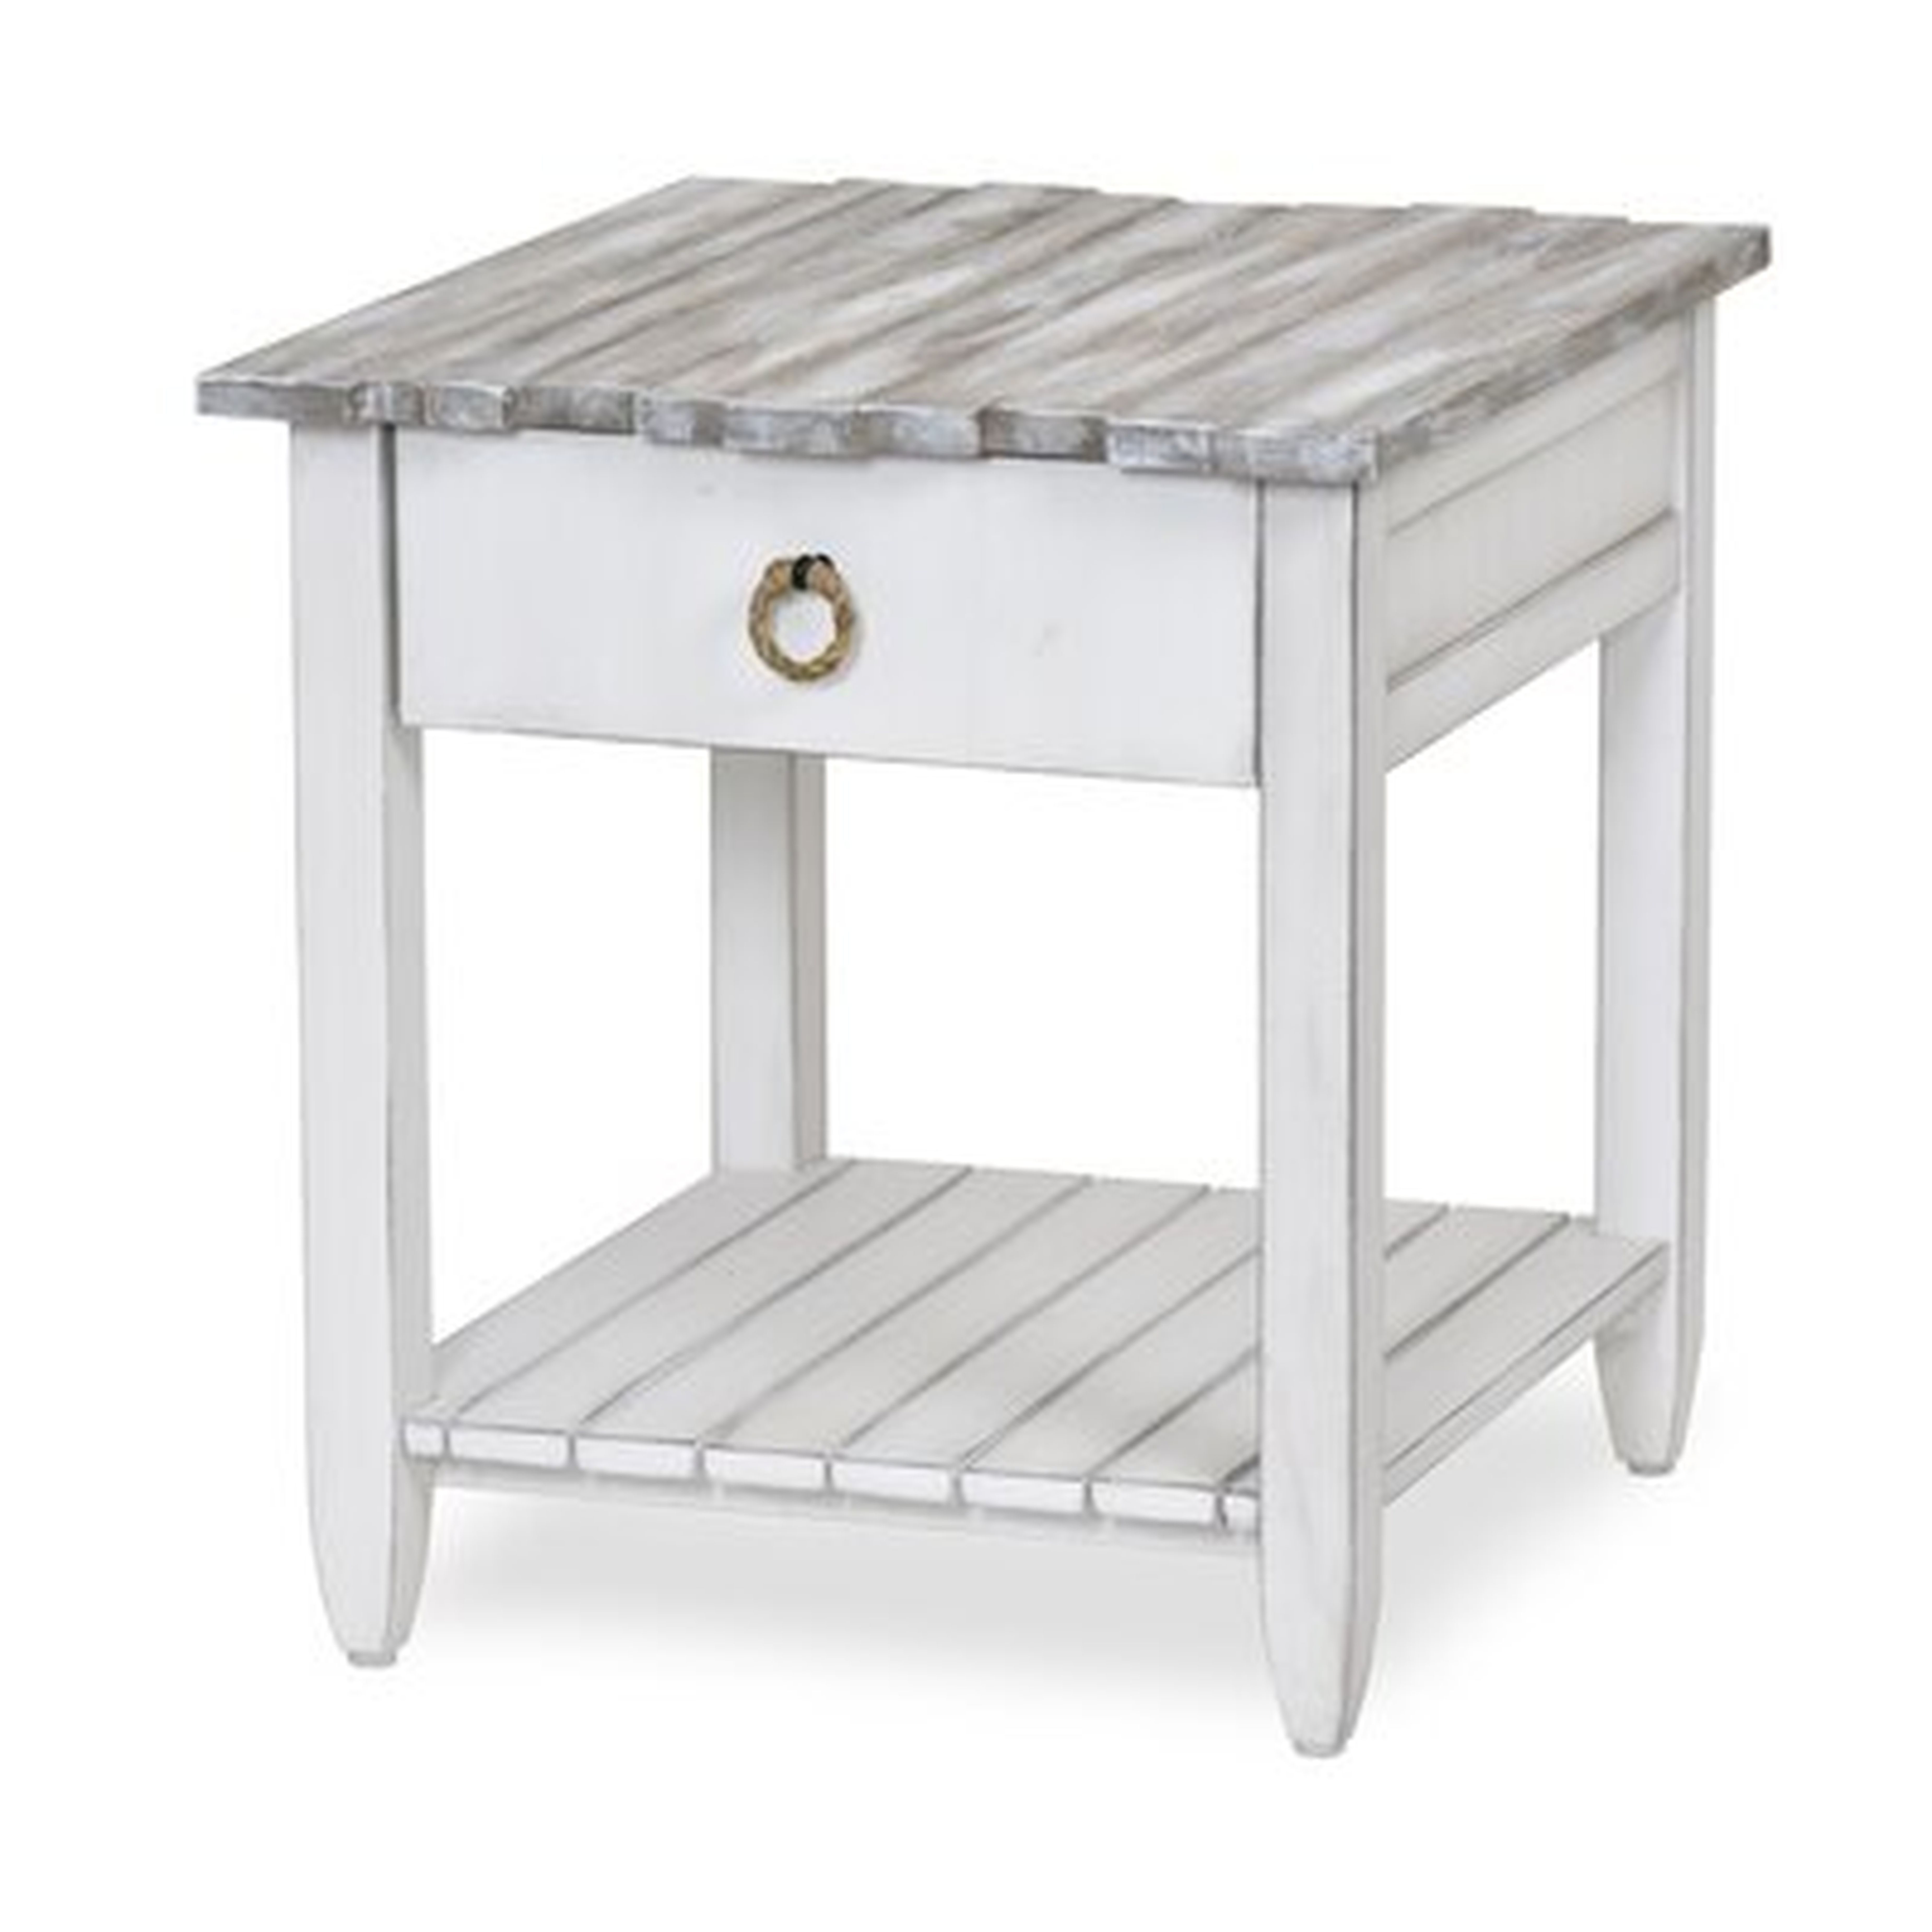 Decastro End Table with Storage - Wayfair